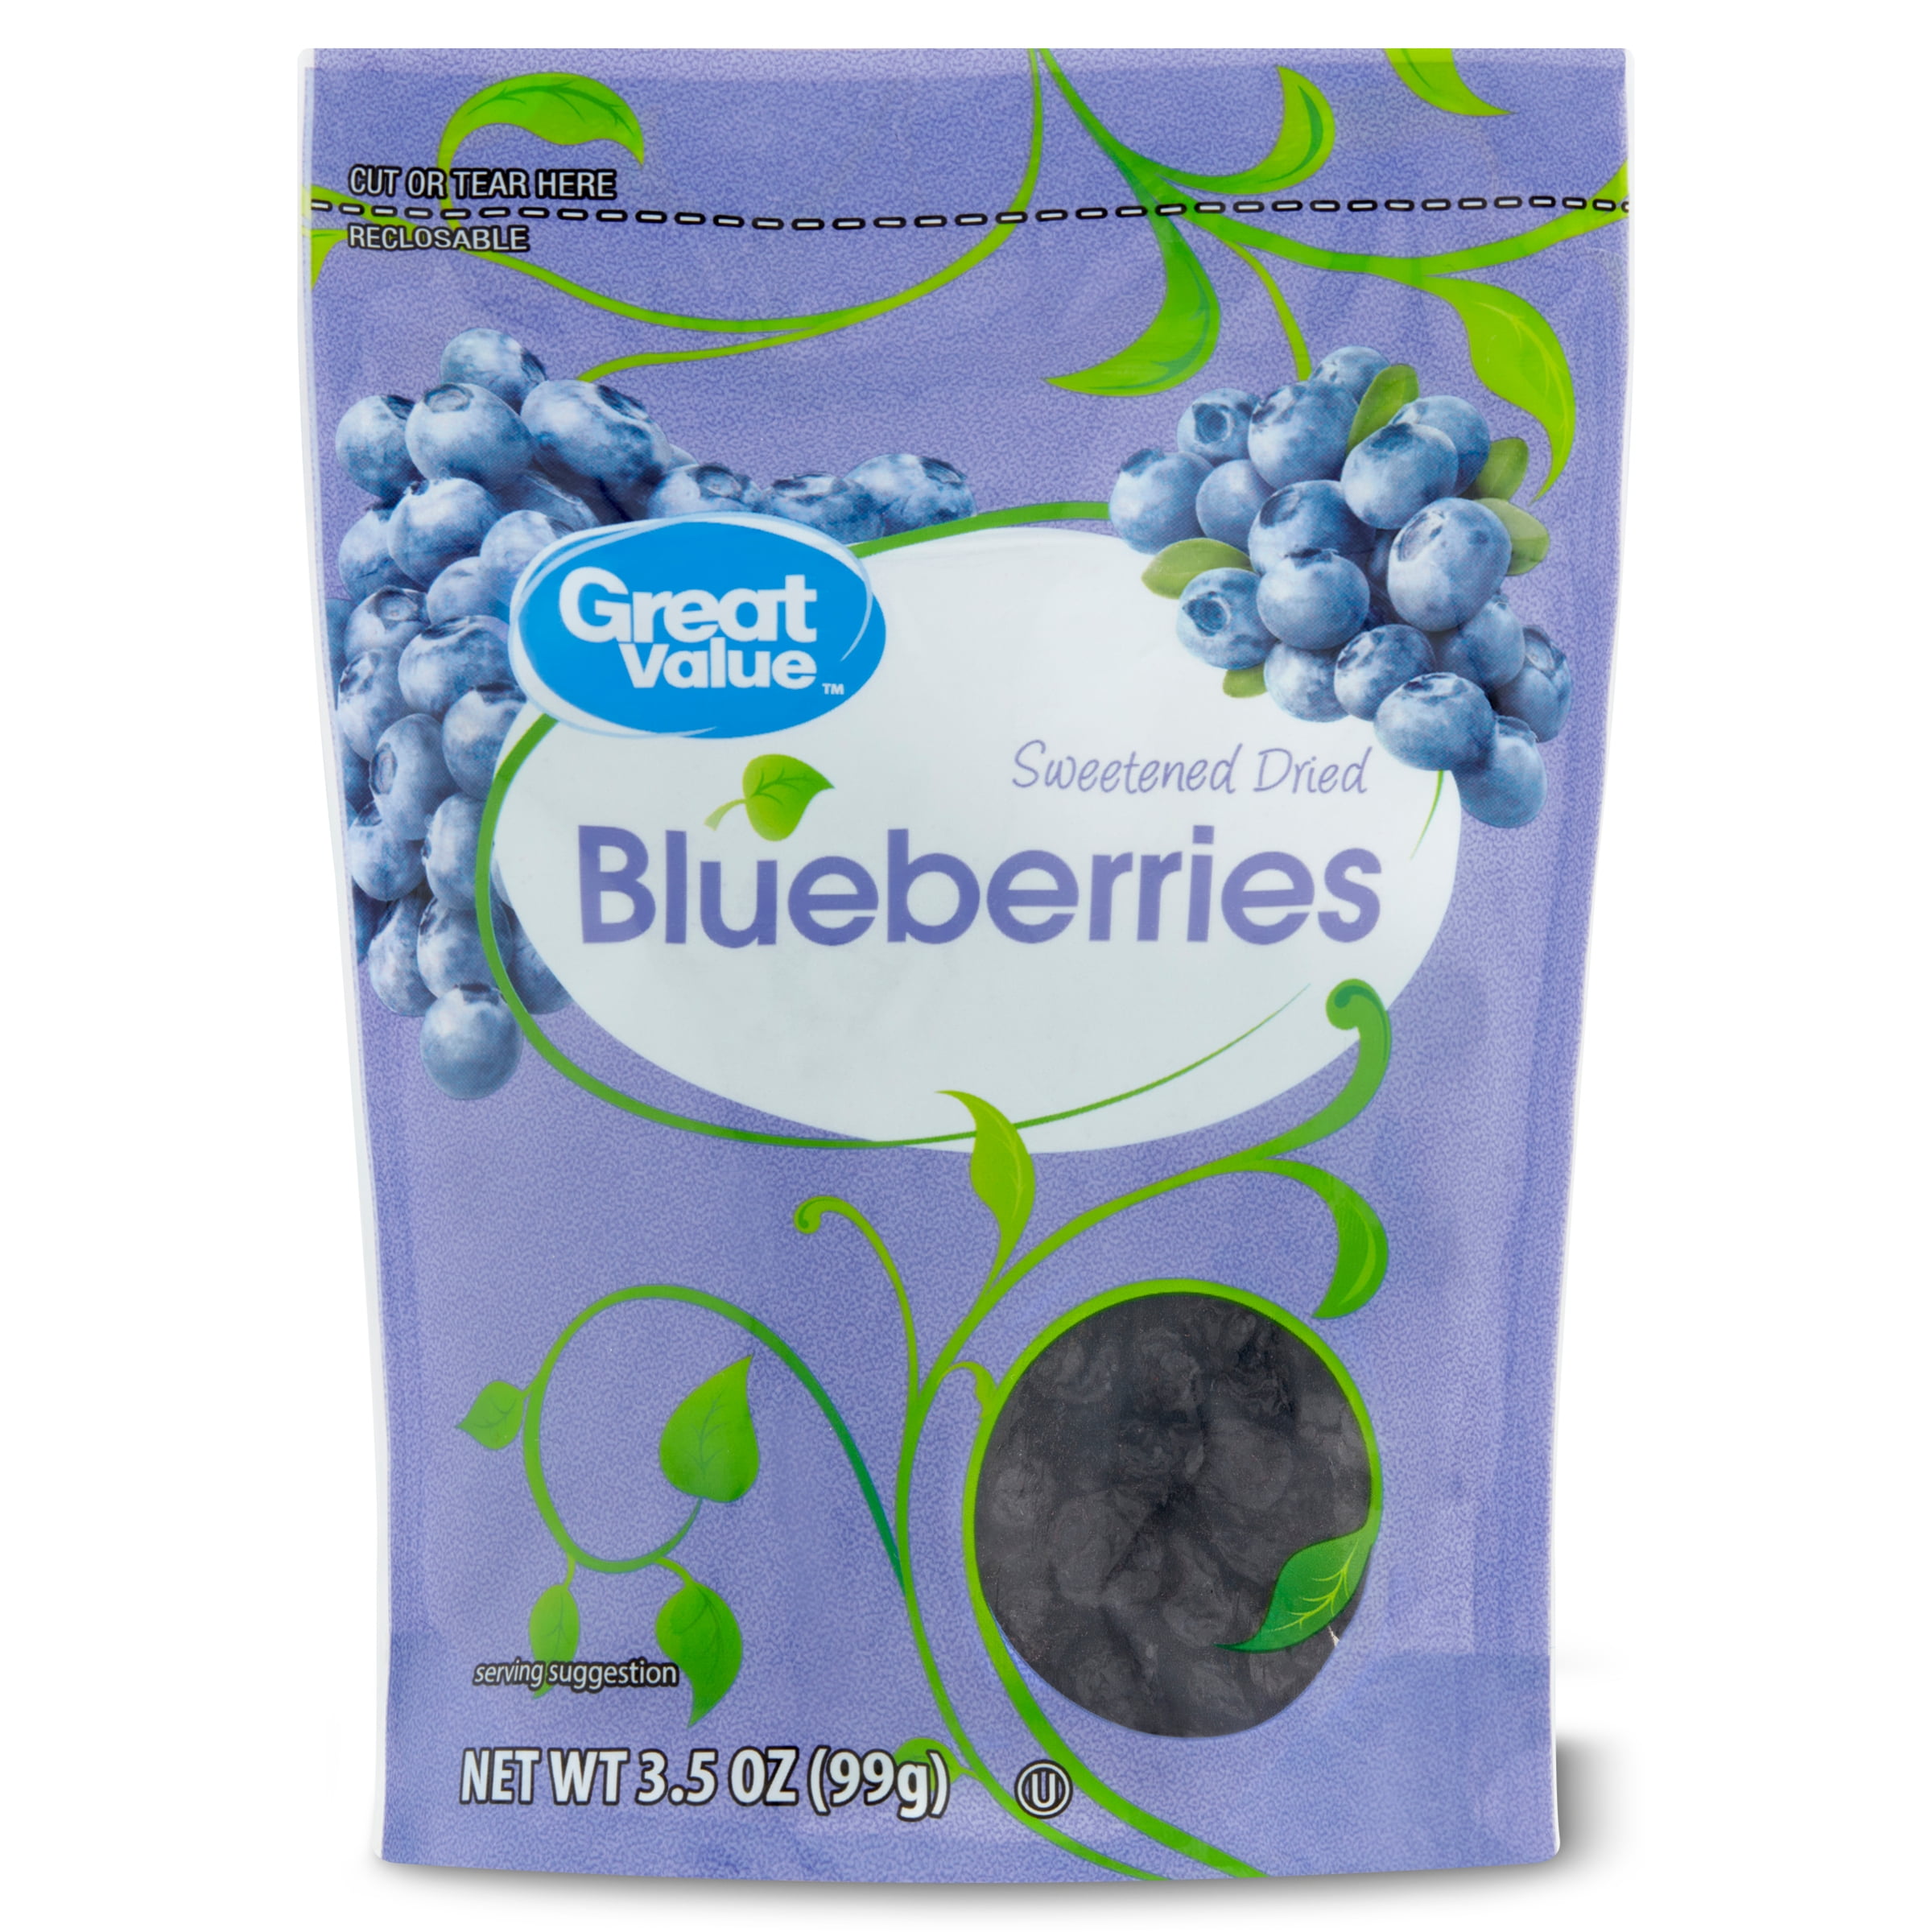 Great Value Dried Blueberries, Sweetened, 3.5 oz.